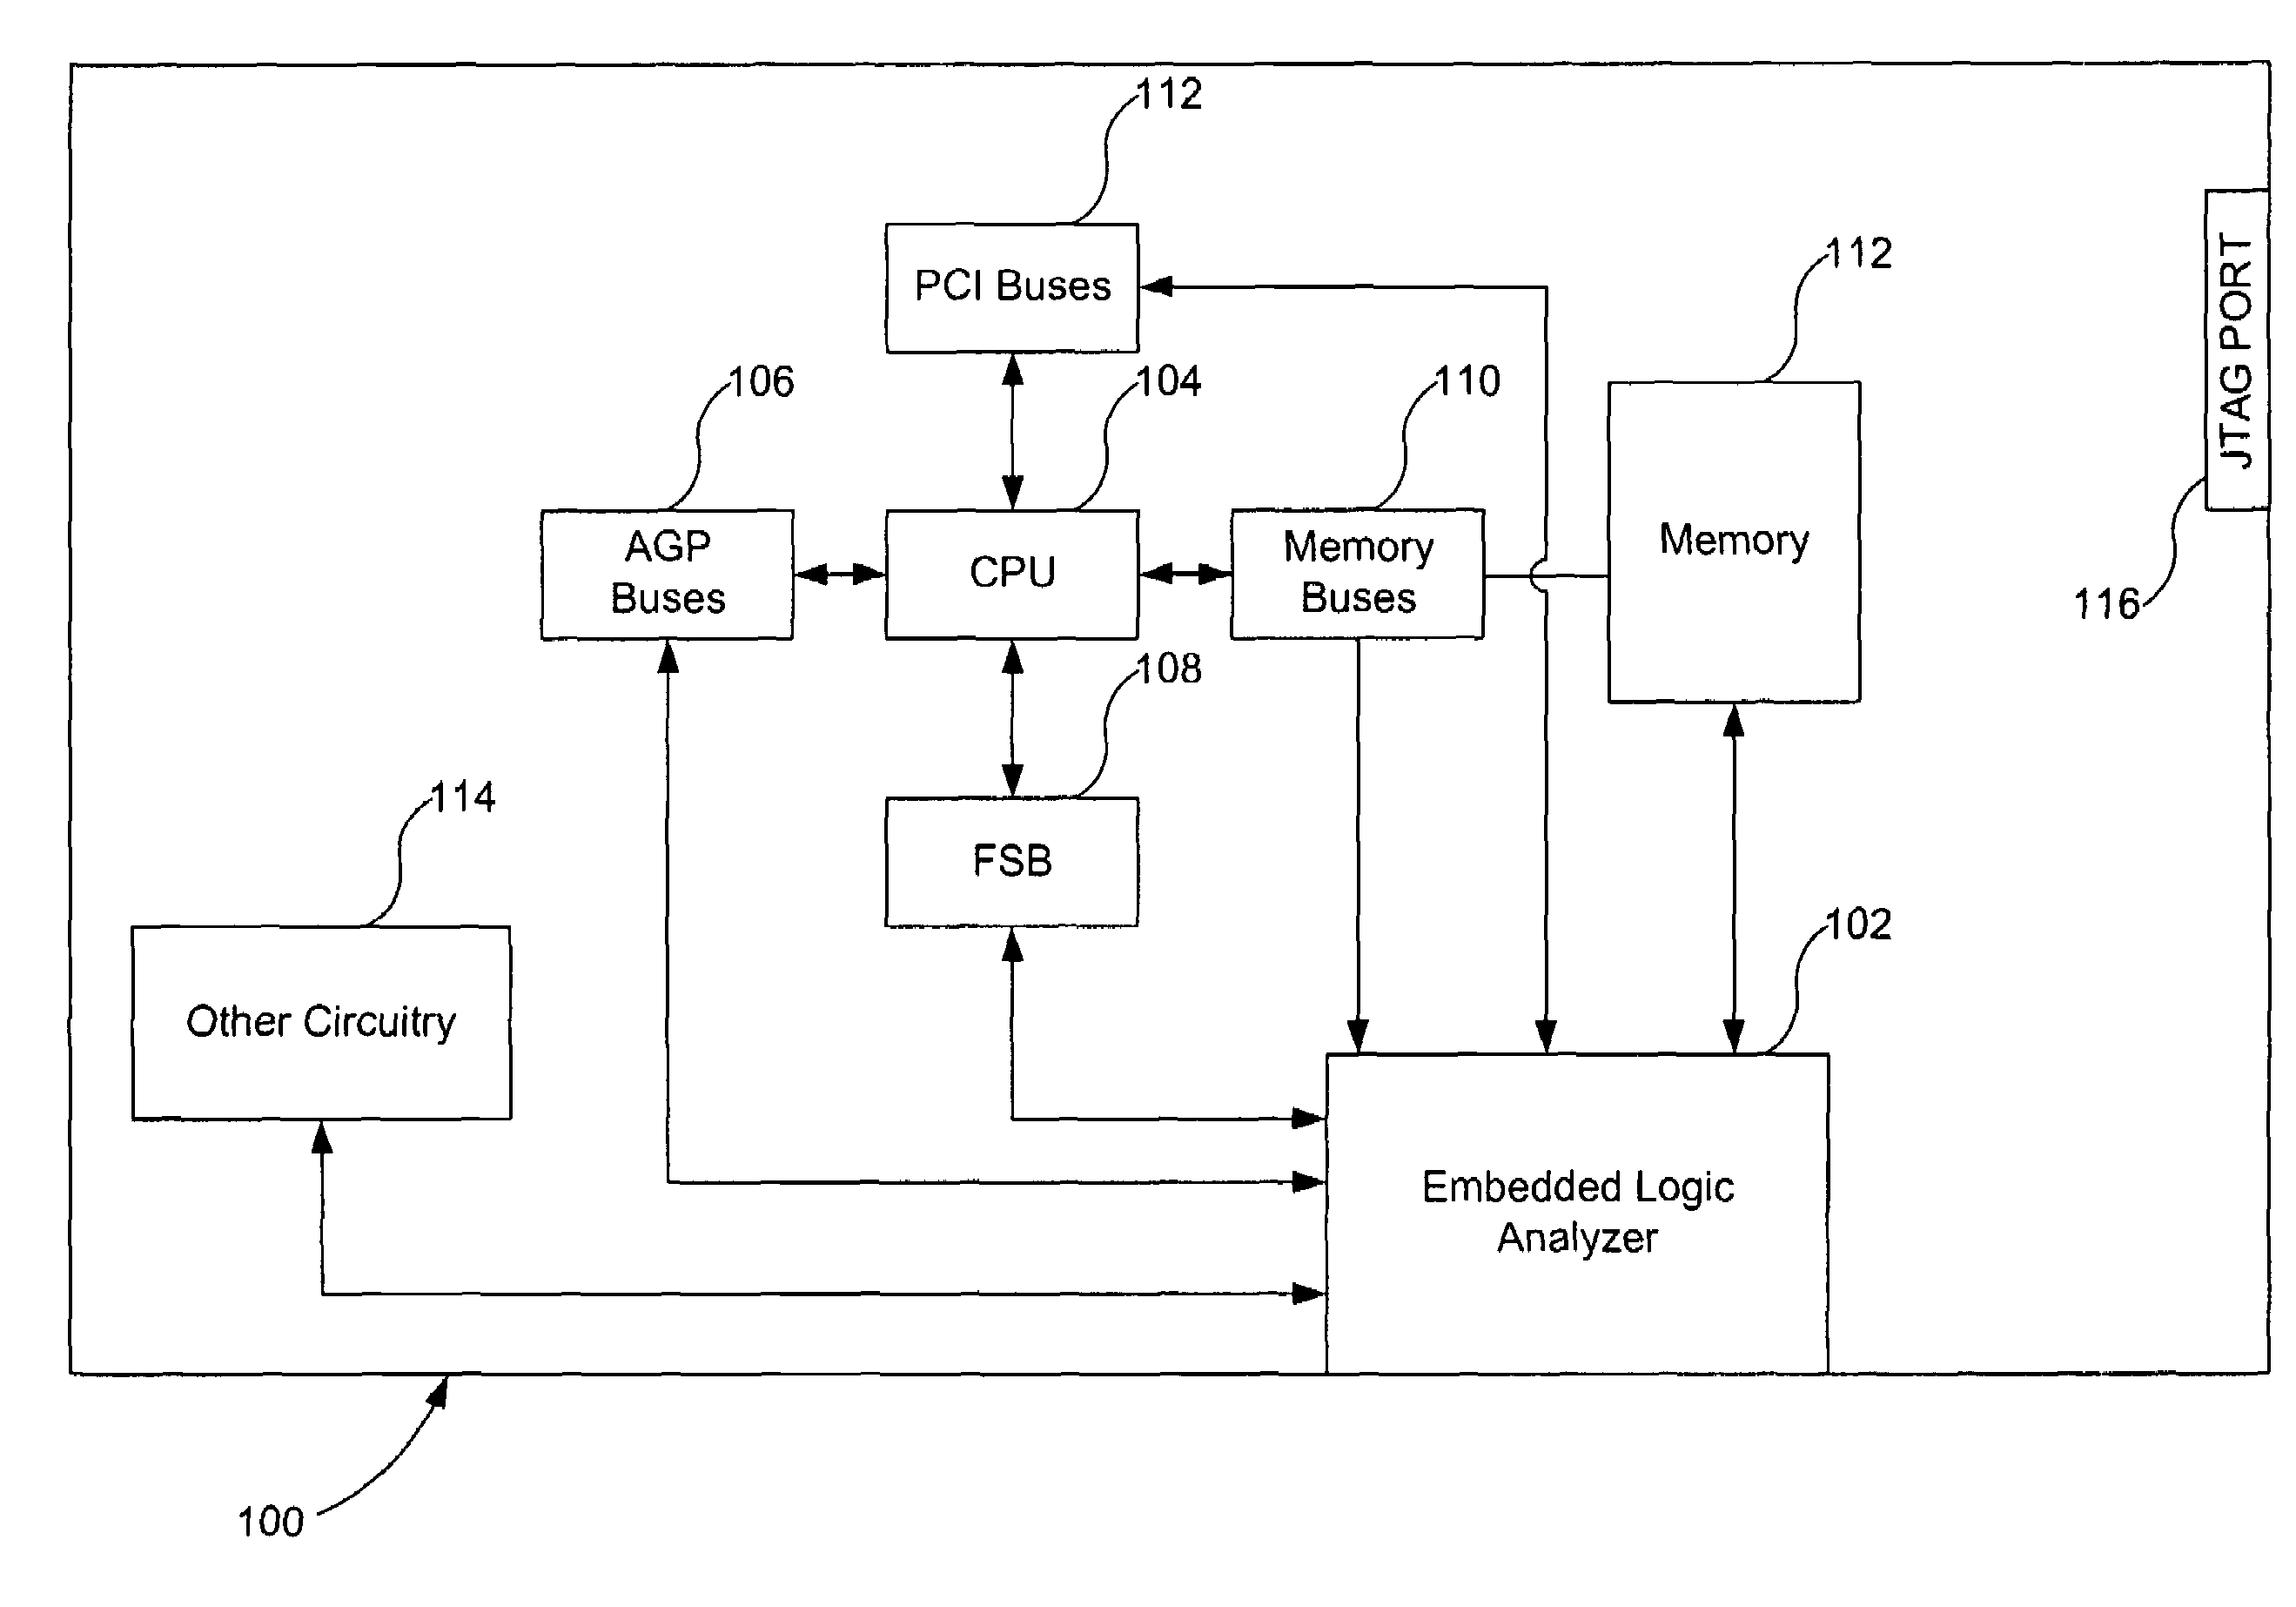 Programmable embedded logic analyzer in an integrated circuit